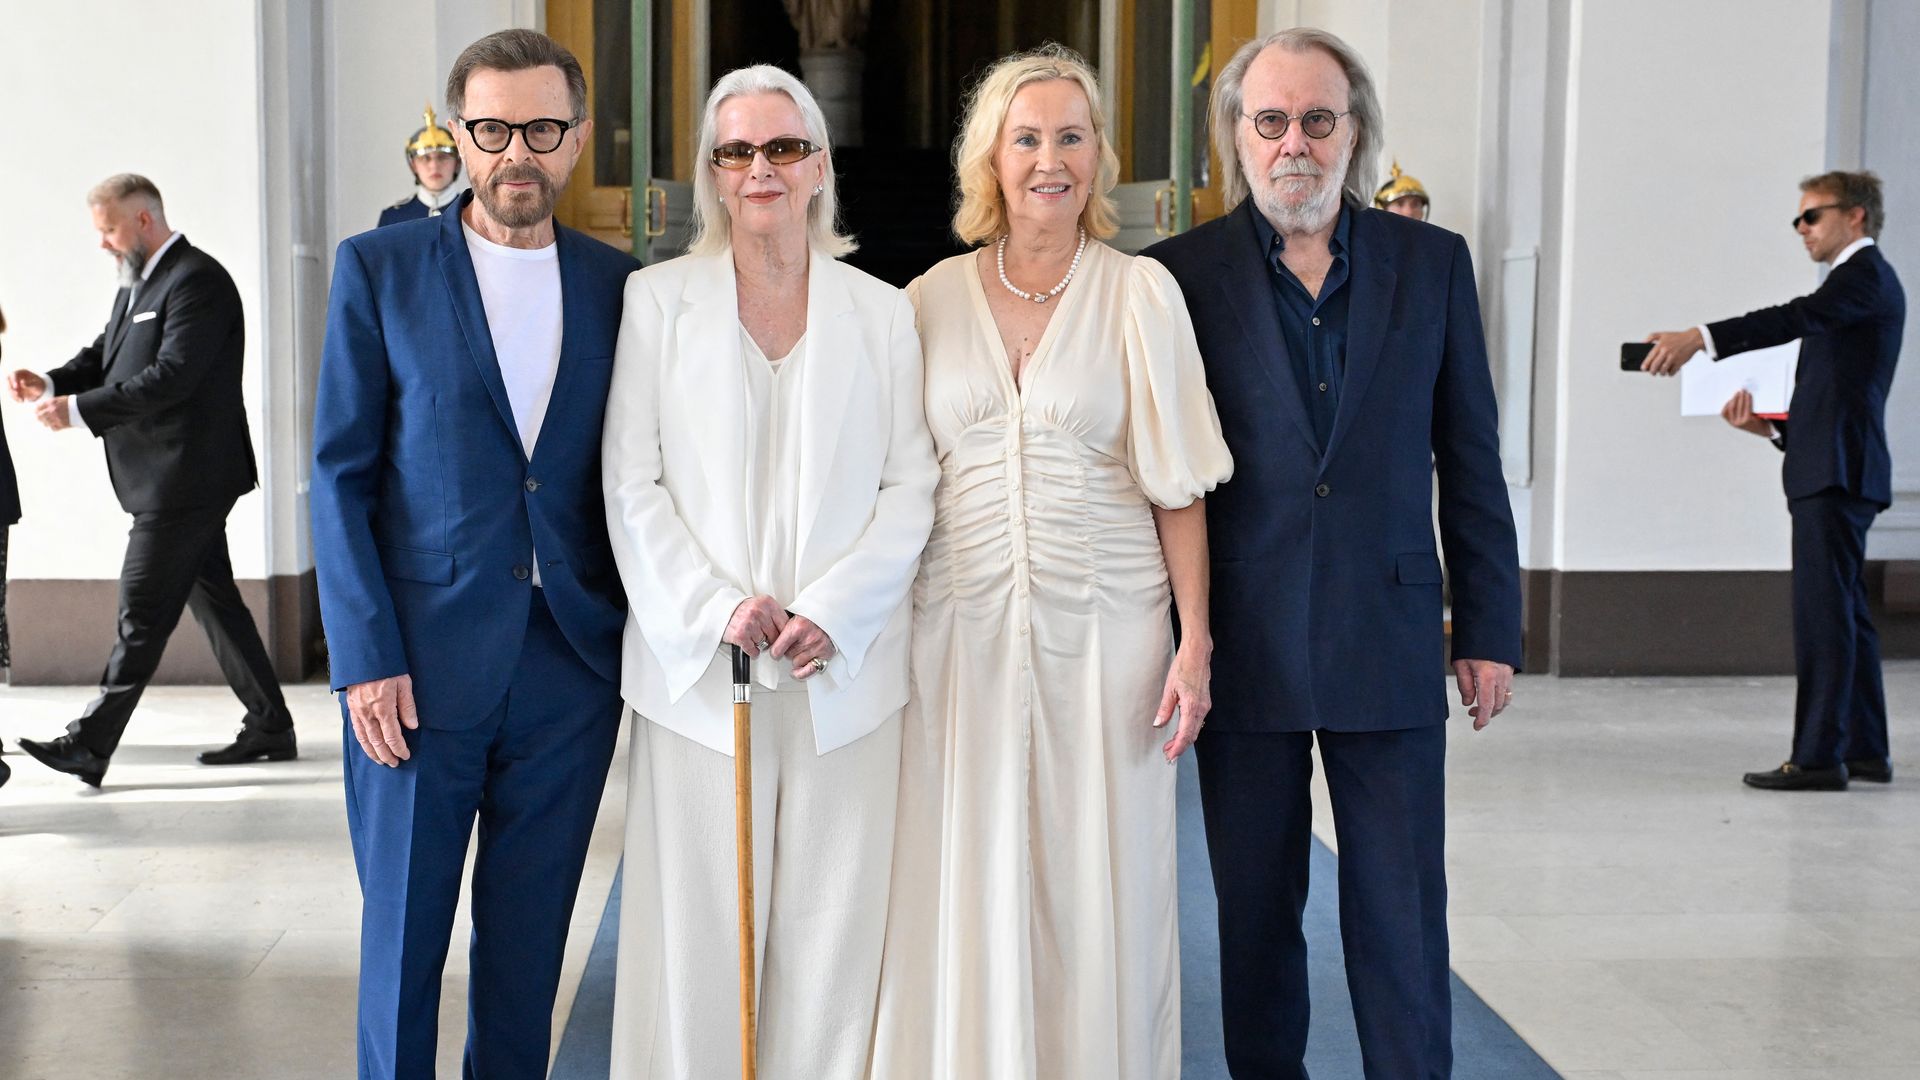 Eurovision winners ABBA receive honour from Swedish royal family